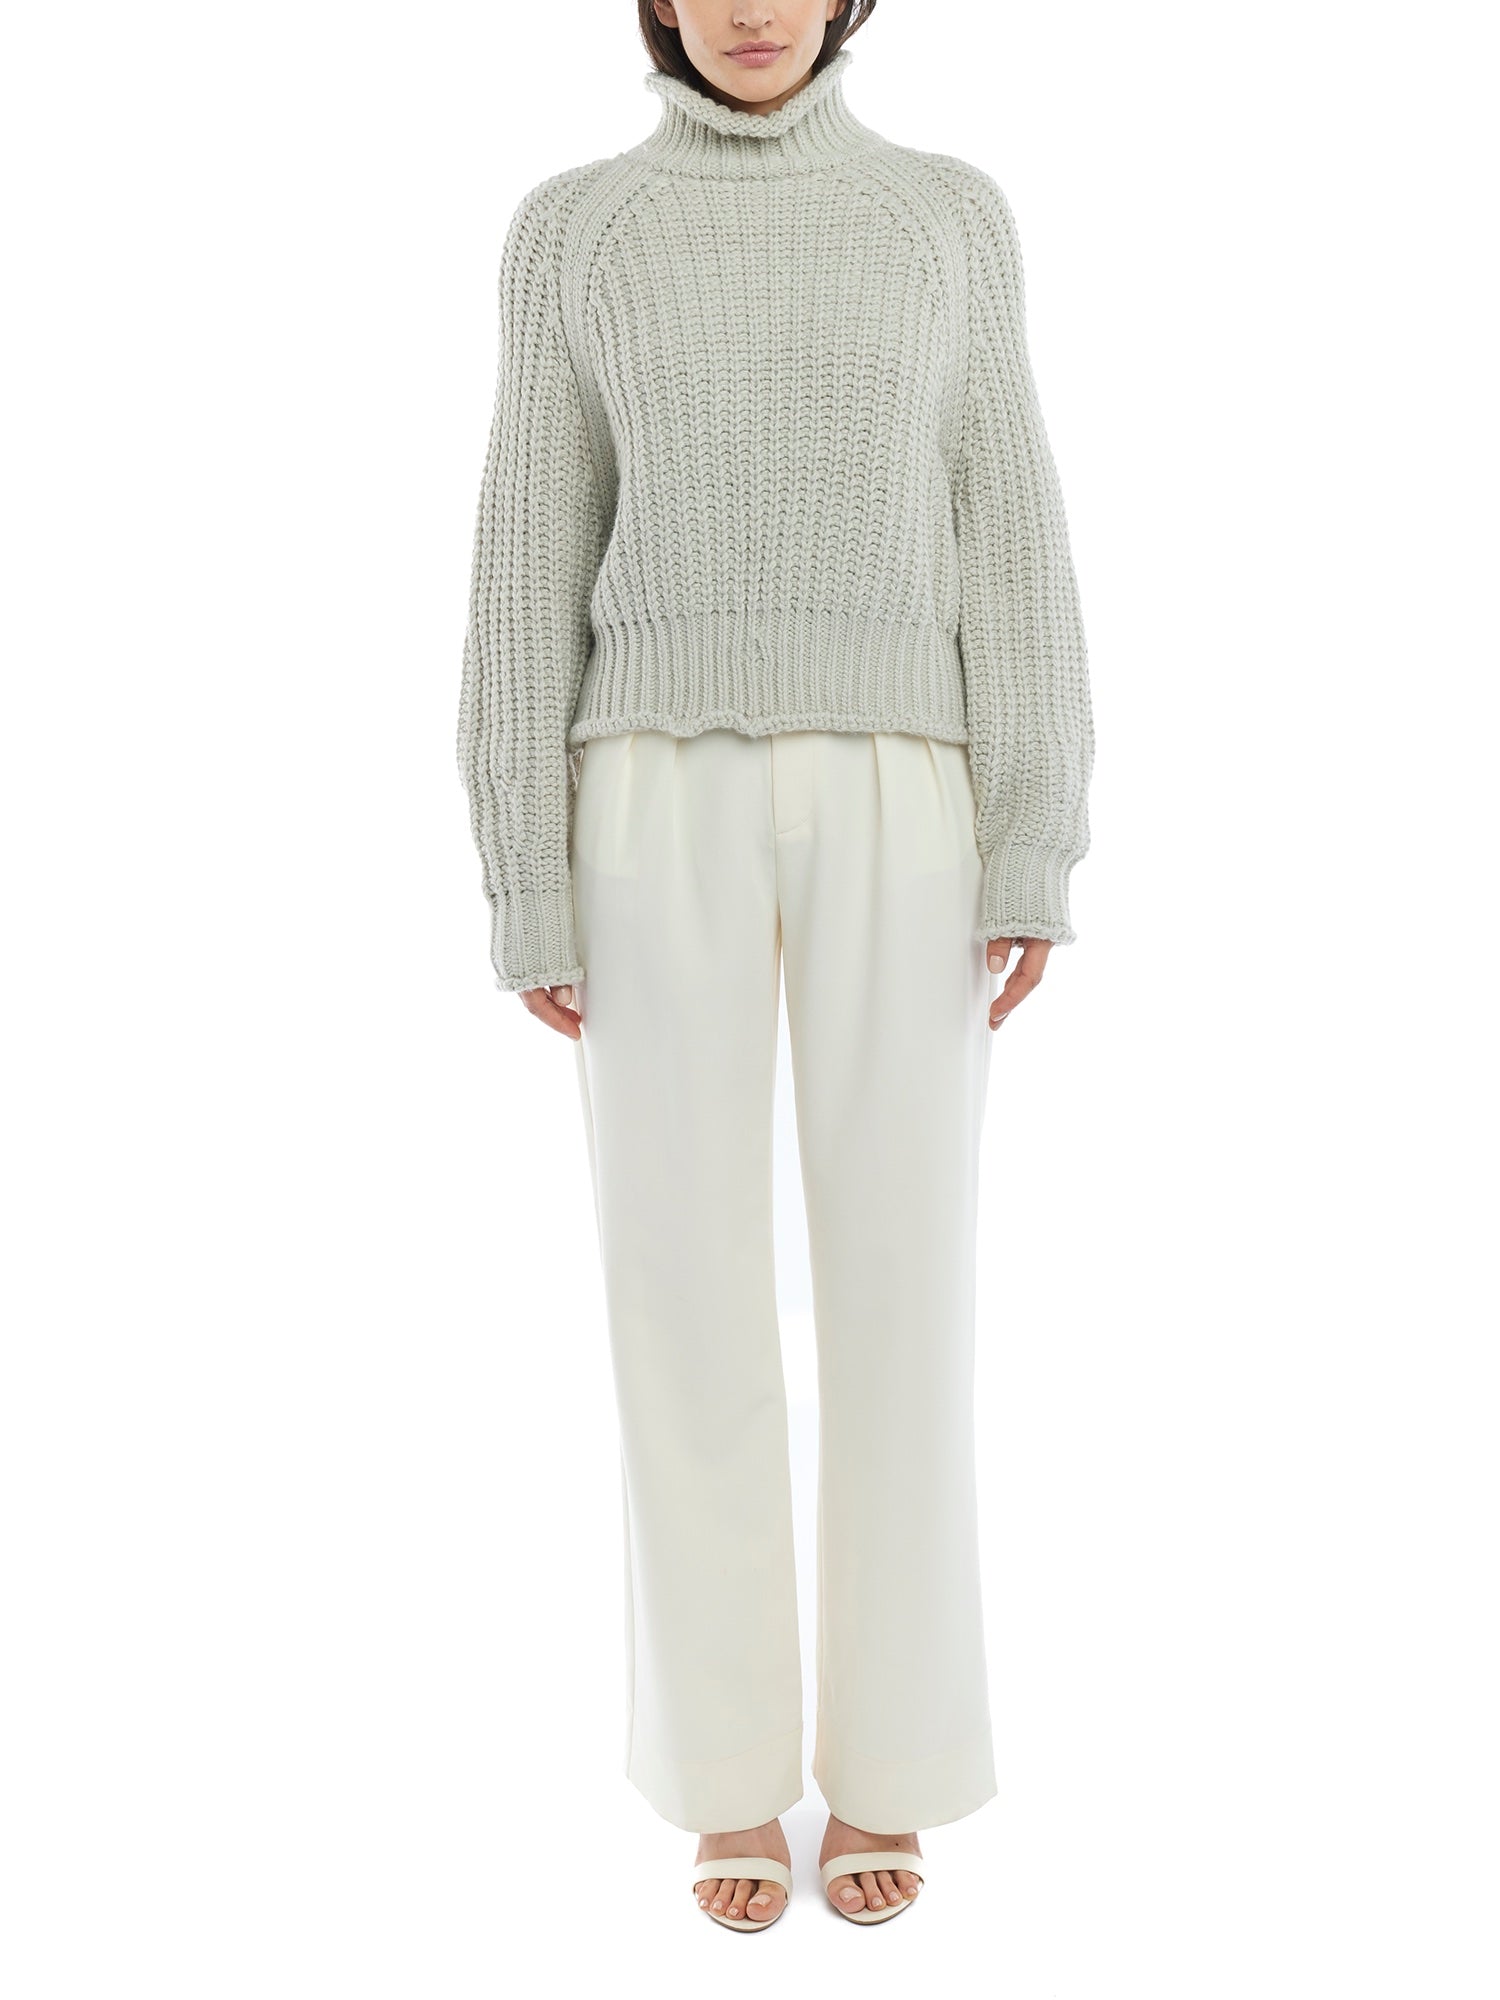 ribbed, chunky knit turtleneck sweater featuring slight balloon sleeves and a funnel neck in grey